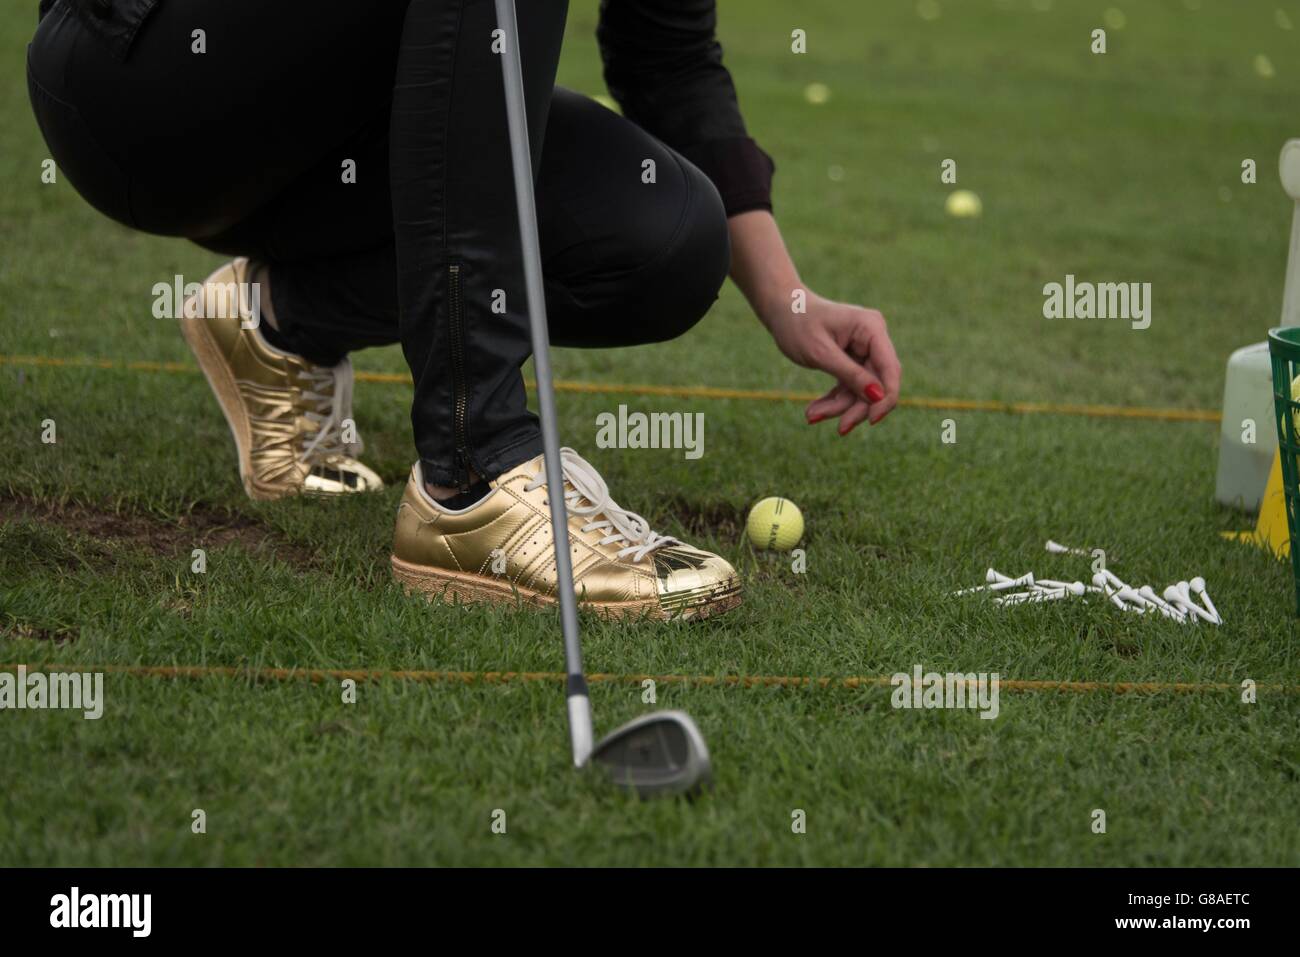 golf shoes at driving range cheap online